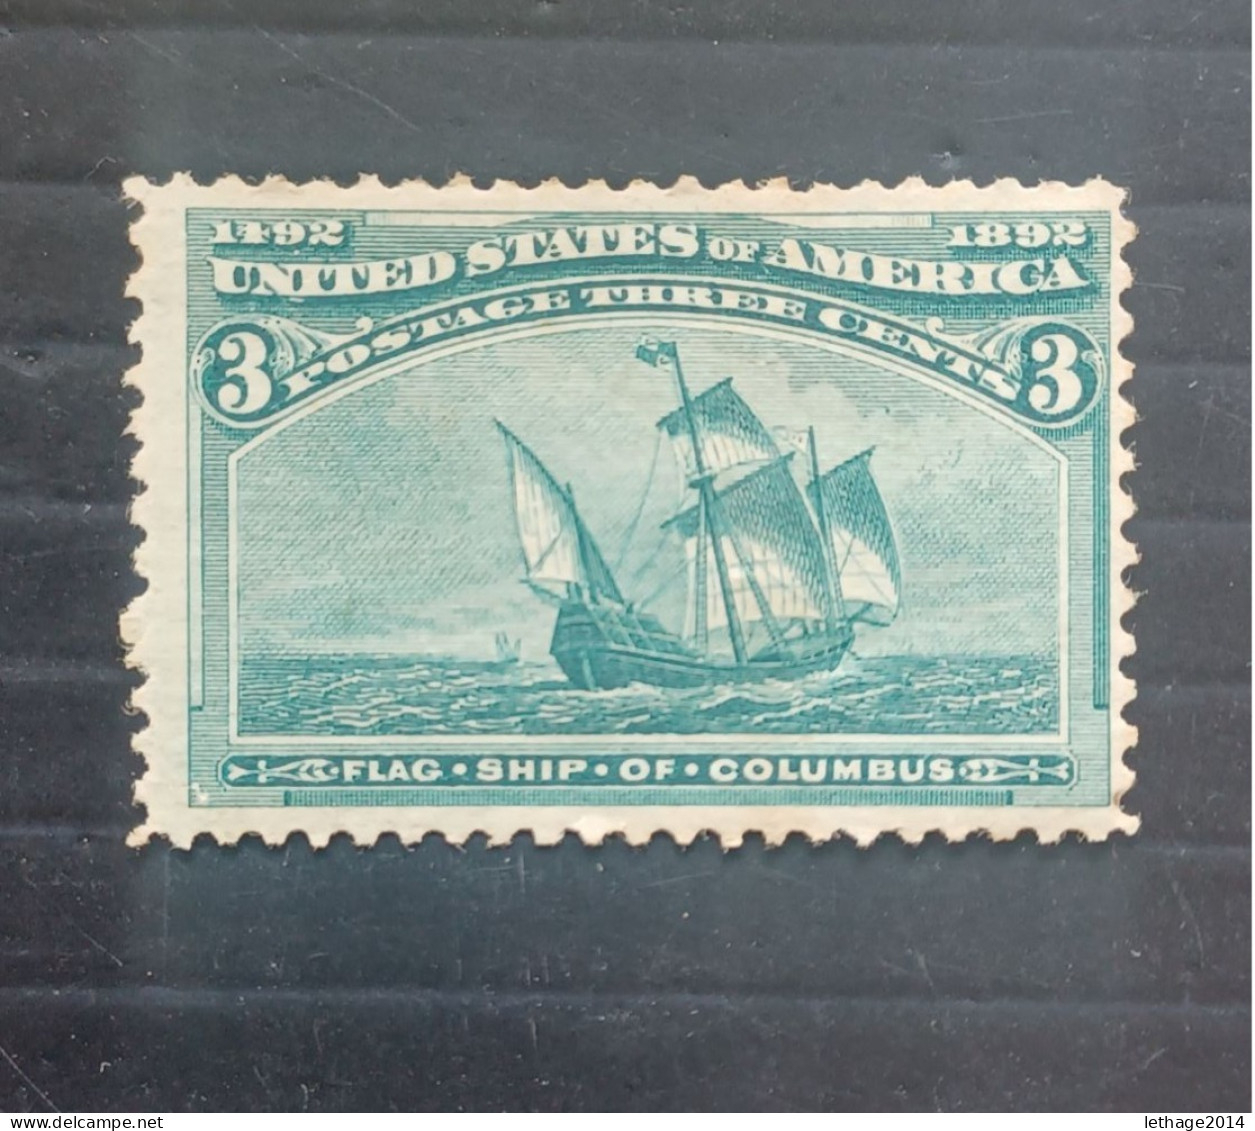 UNITED STATE 1893 COLUMBIAN EXPOSITION MNHL + BIG STOCK LOT MIX 85 SCANNERS PERFIN TAX WASHINGTON STAMPS MNH FRAGMANT - Nuovi